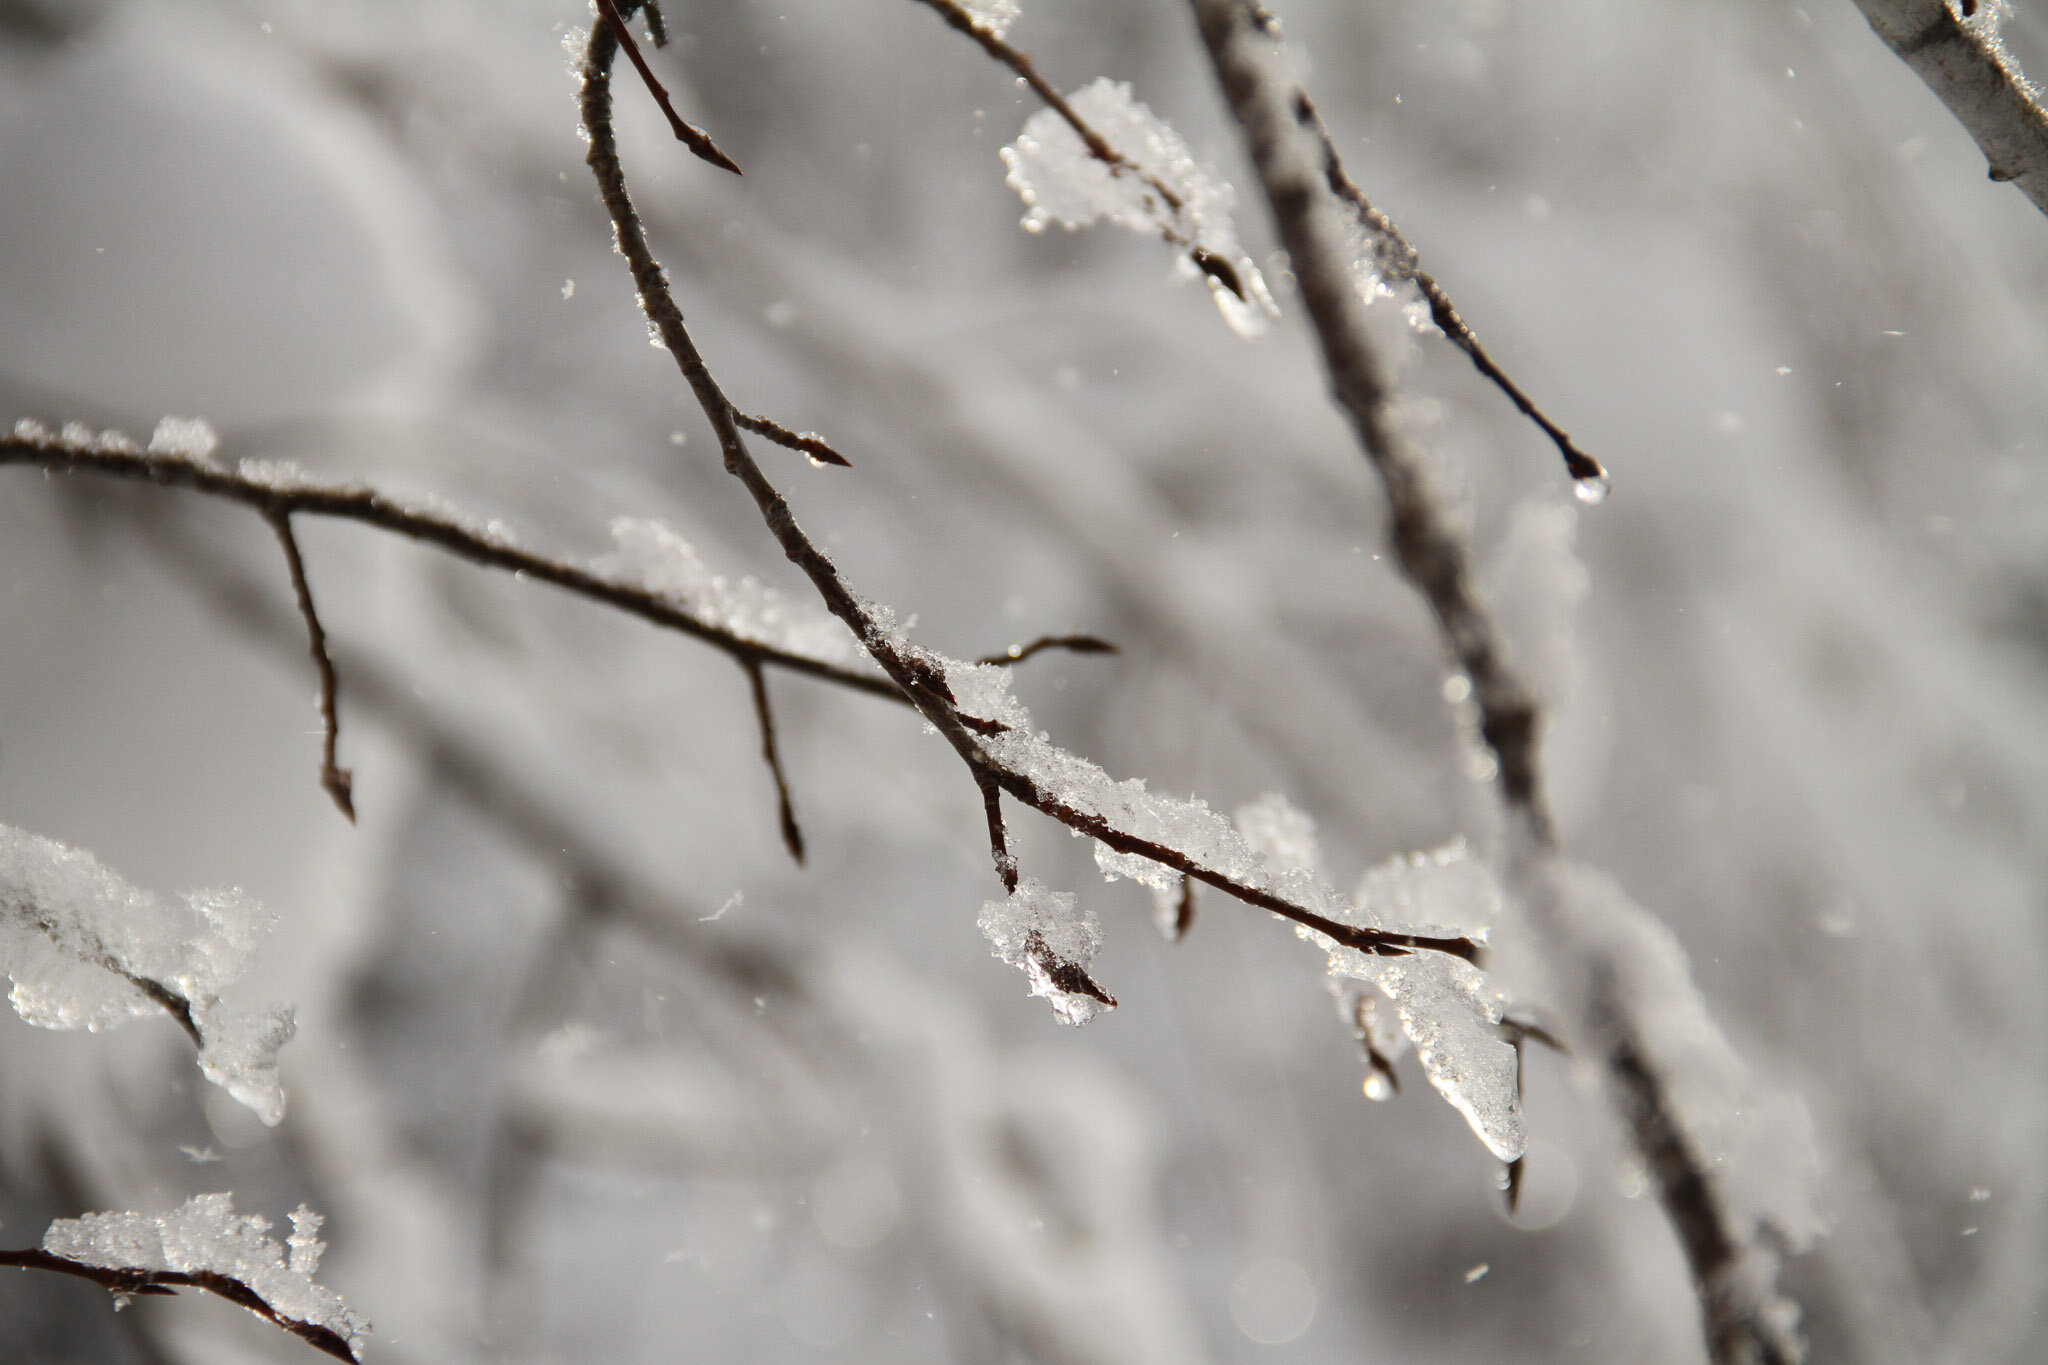  Icy tree branches 